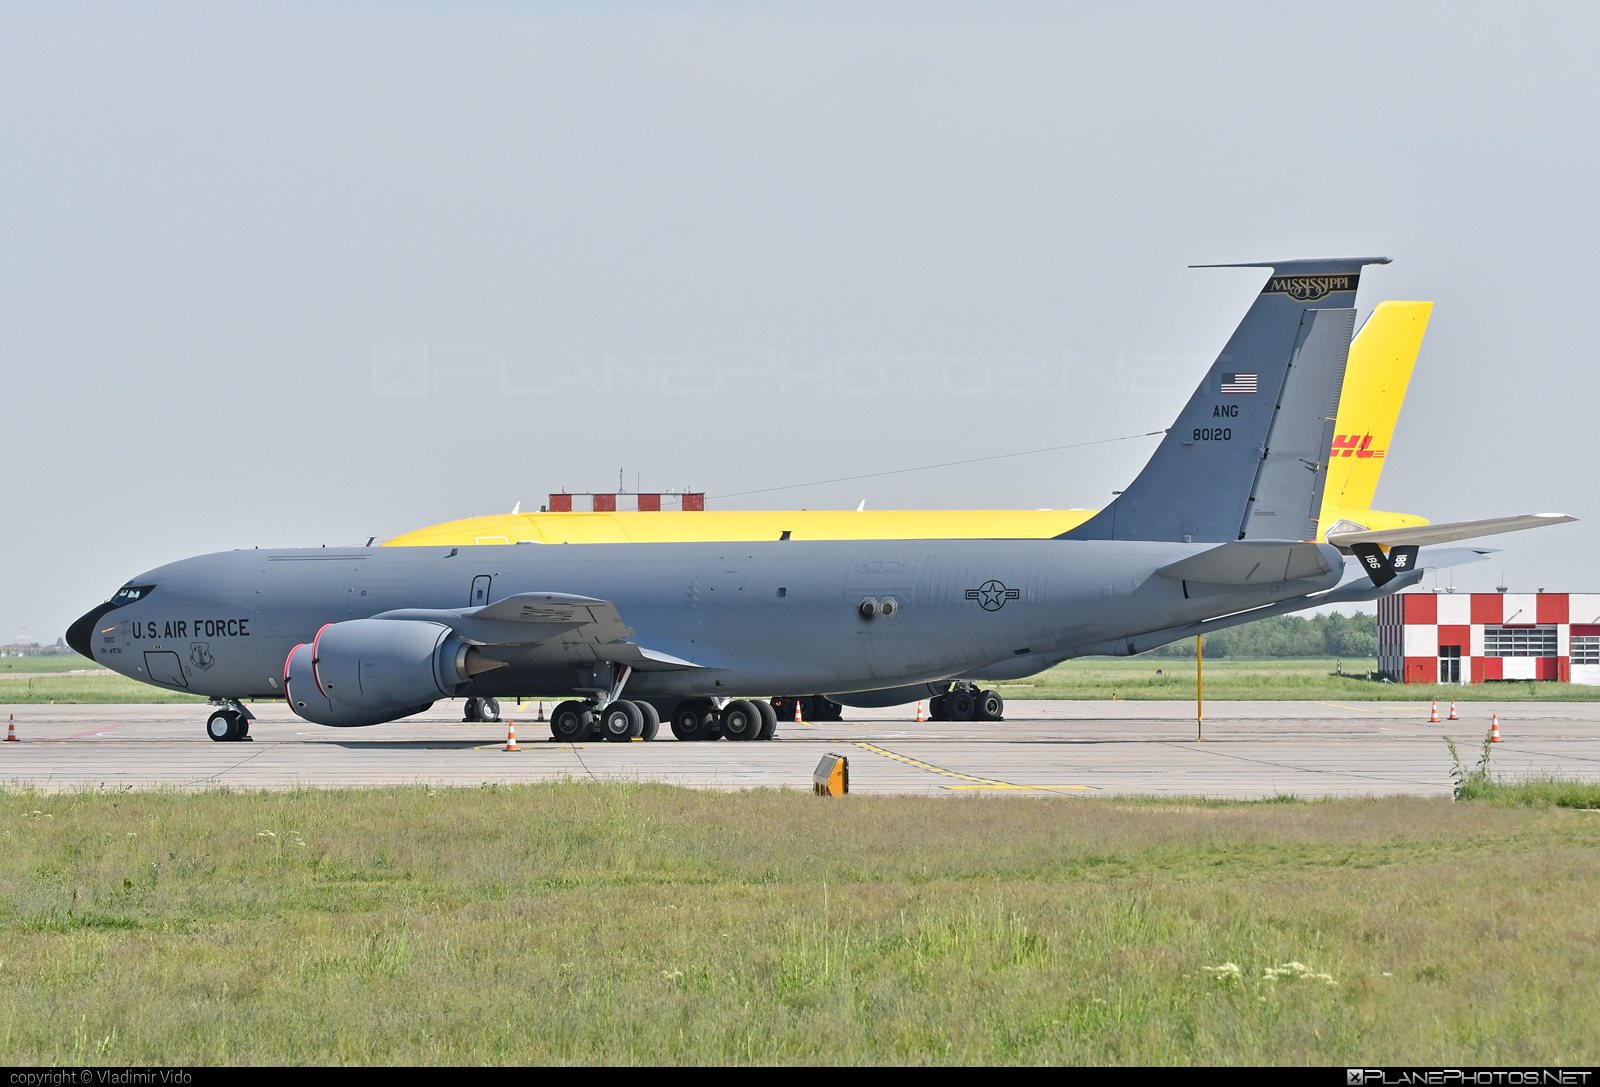 Boeing KC-135R Stratotanker - 58-0120 operated by US Air Force (USAF) #boeing #kc135 #kc135r #kc135stratotanker #stratotanker #usaf #usairforce